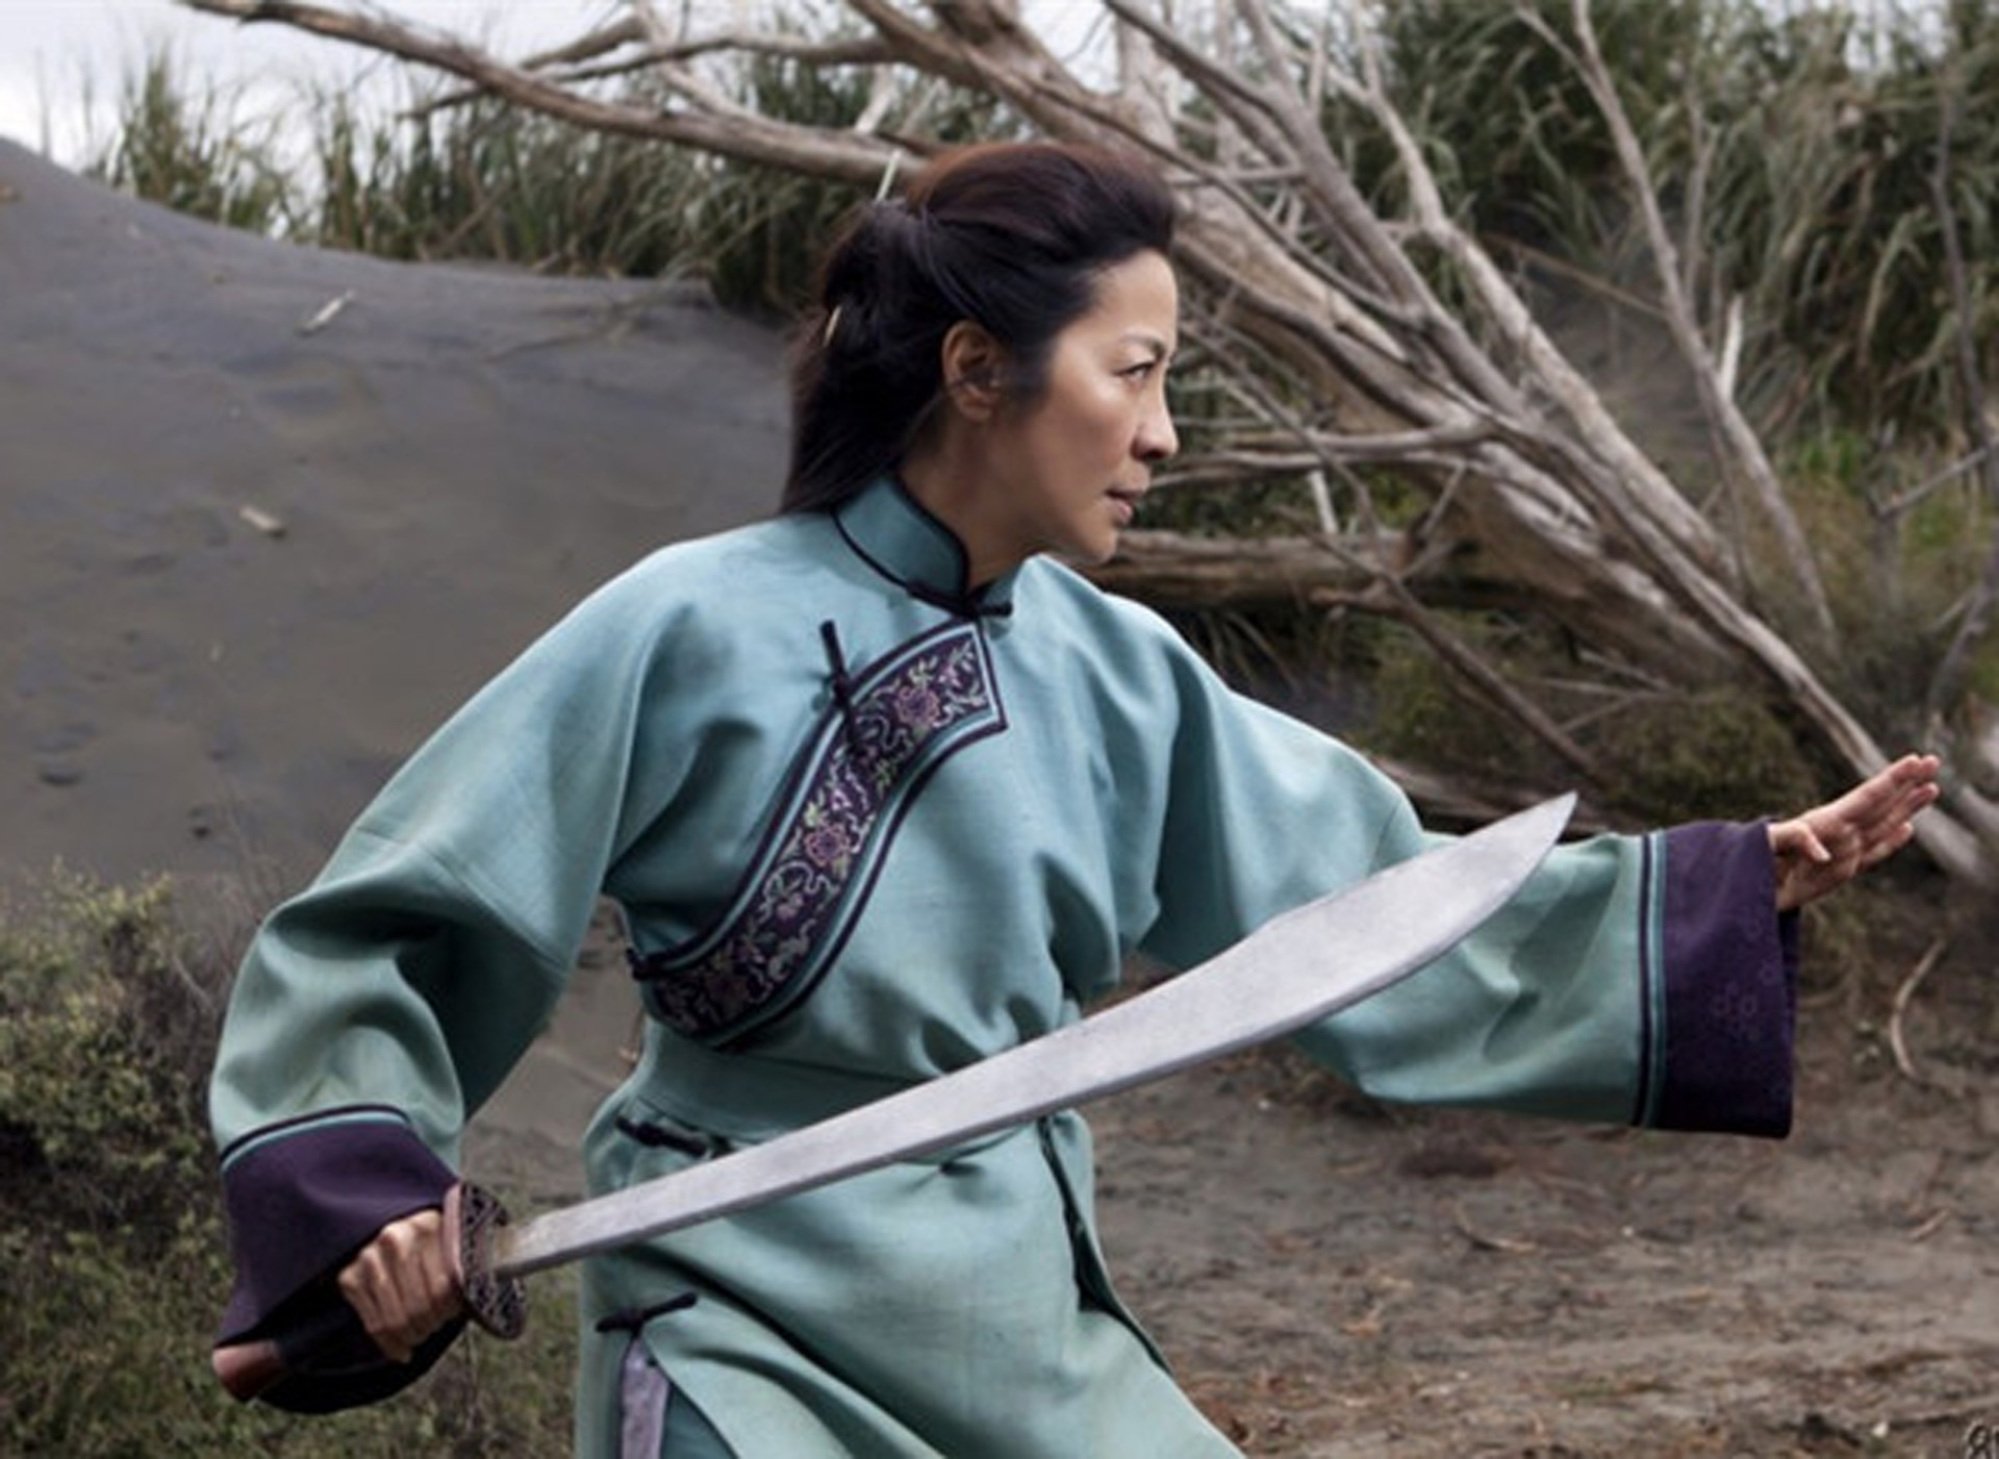 An Asian woman holds a sword and her hand out